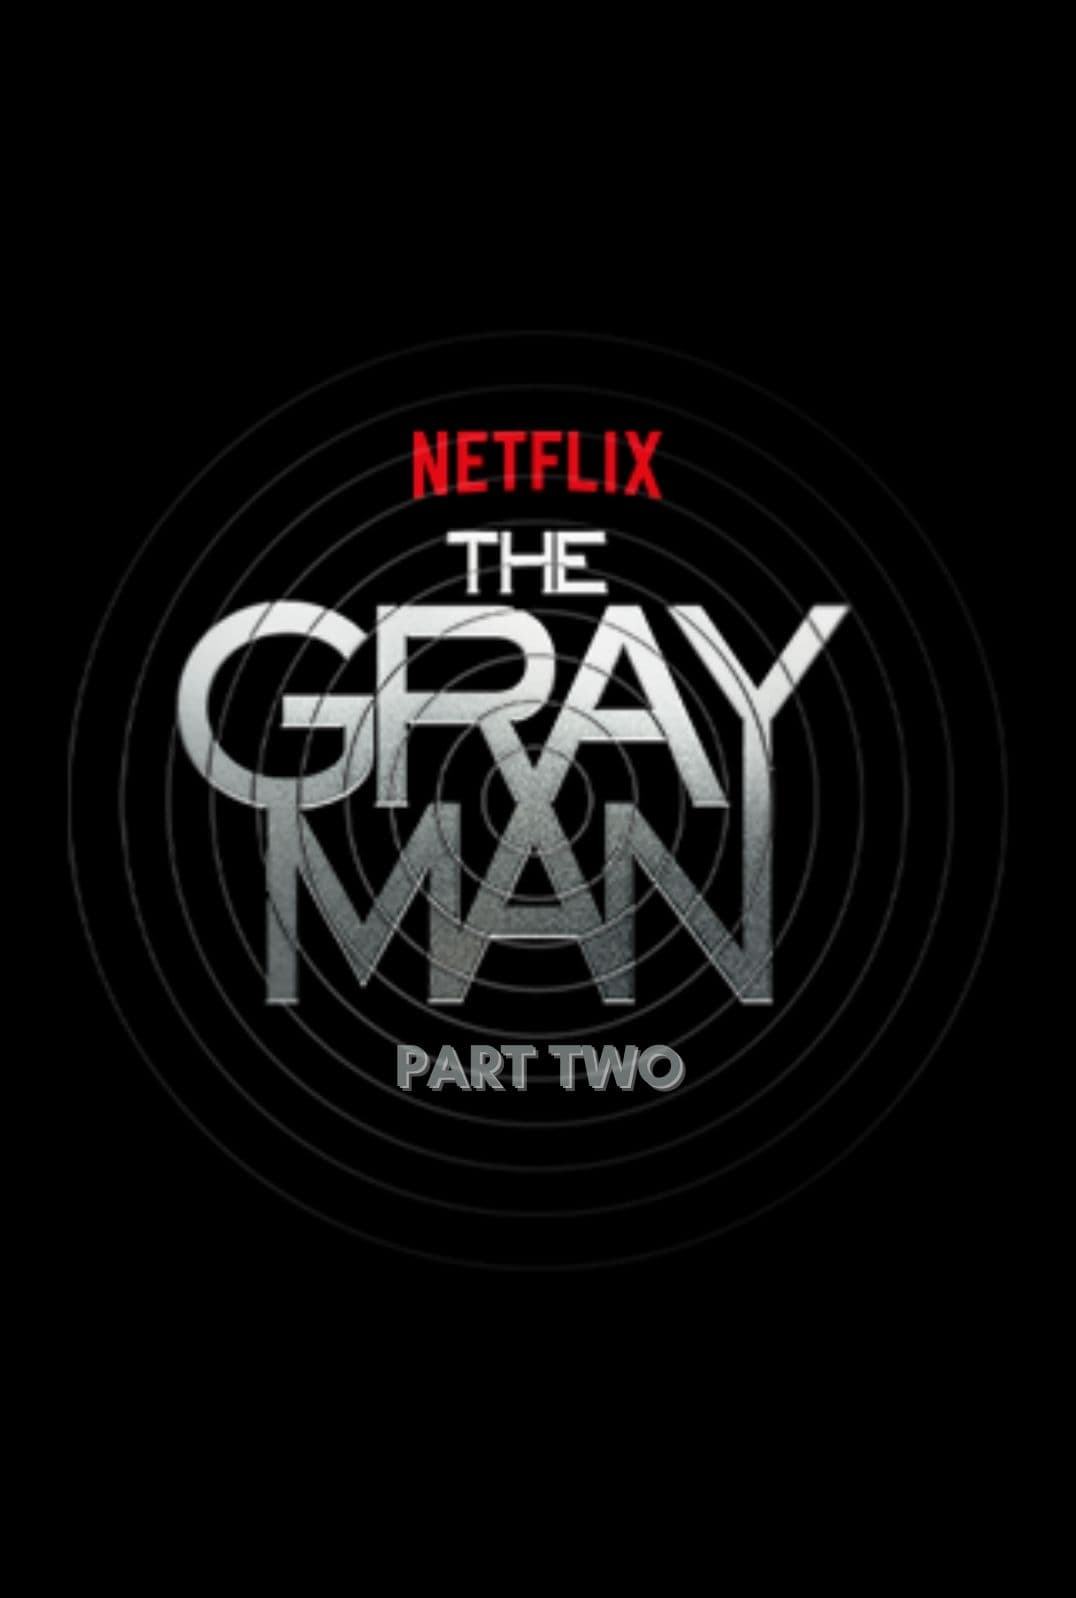 Untitled 'The Gray Man' Sequel